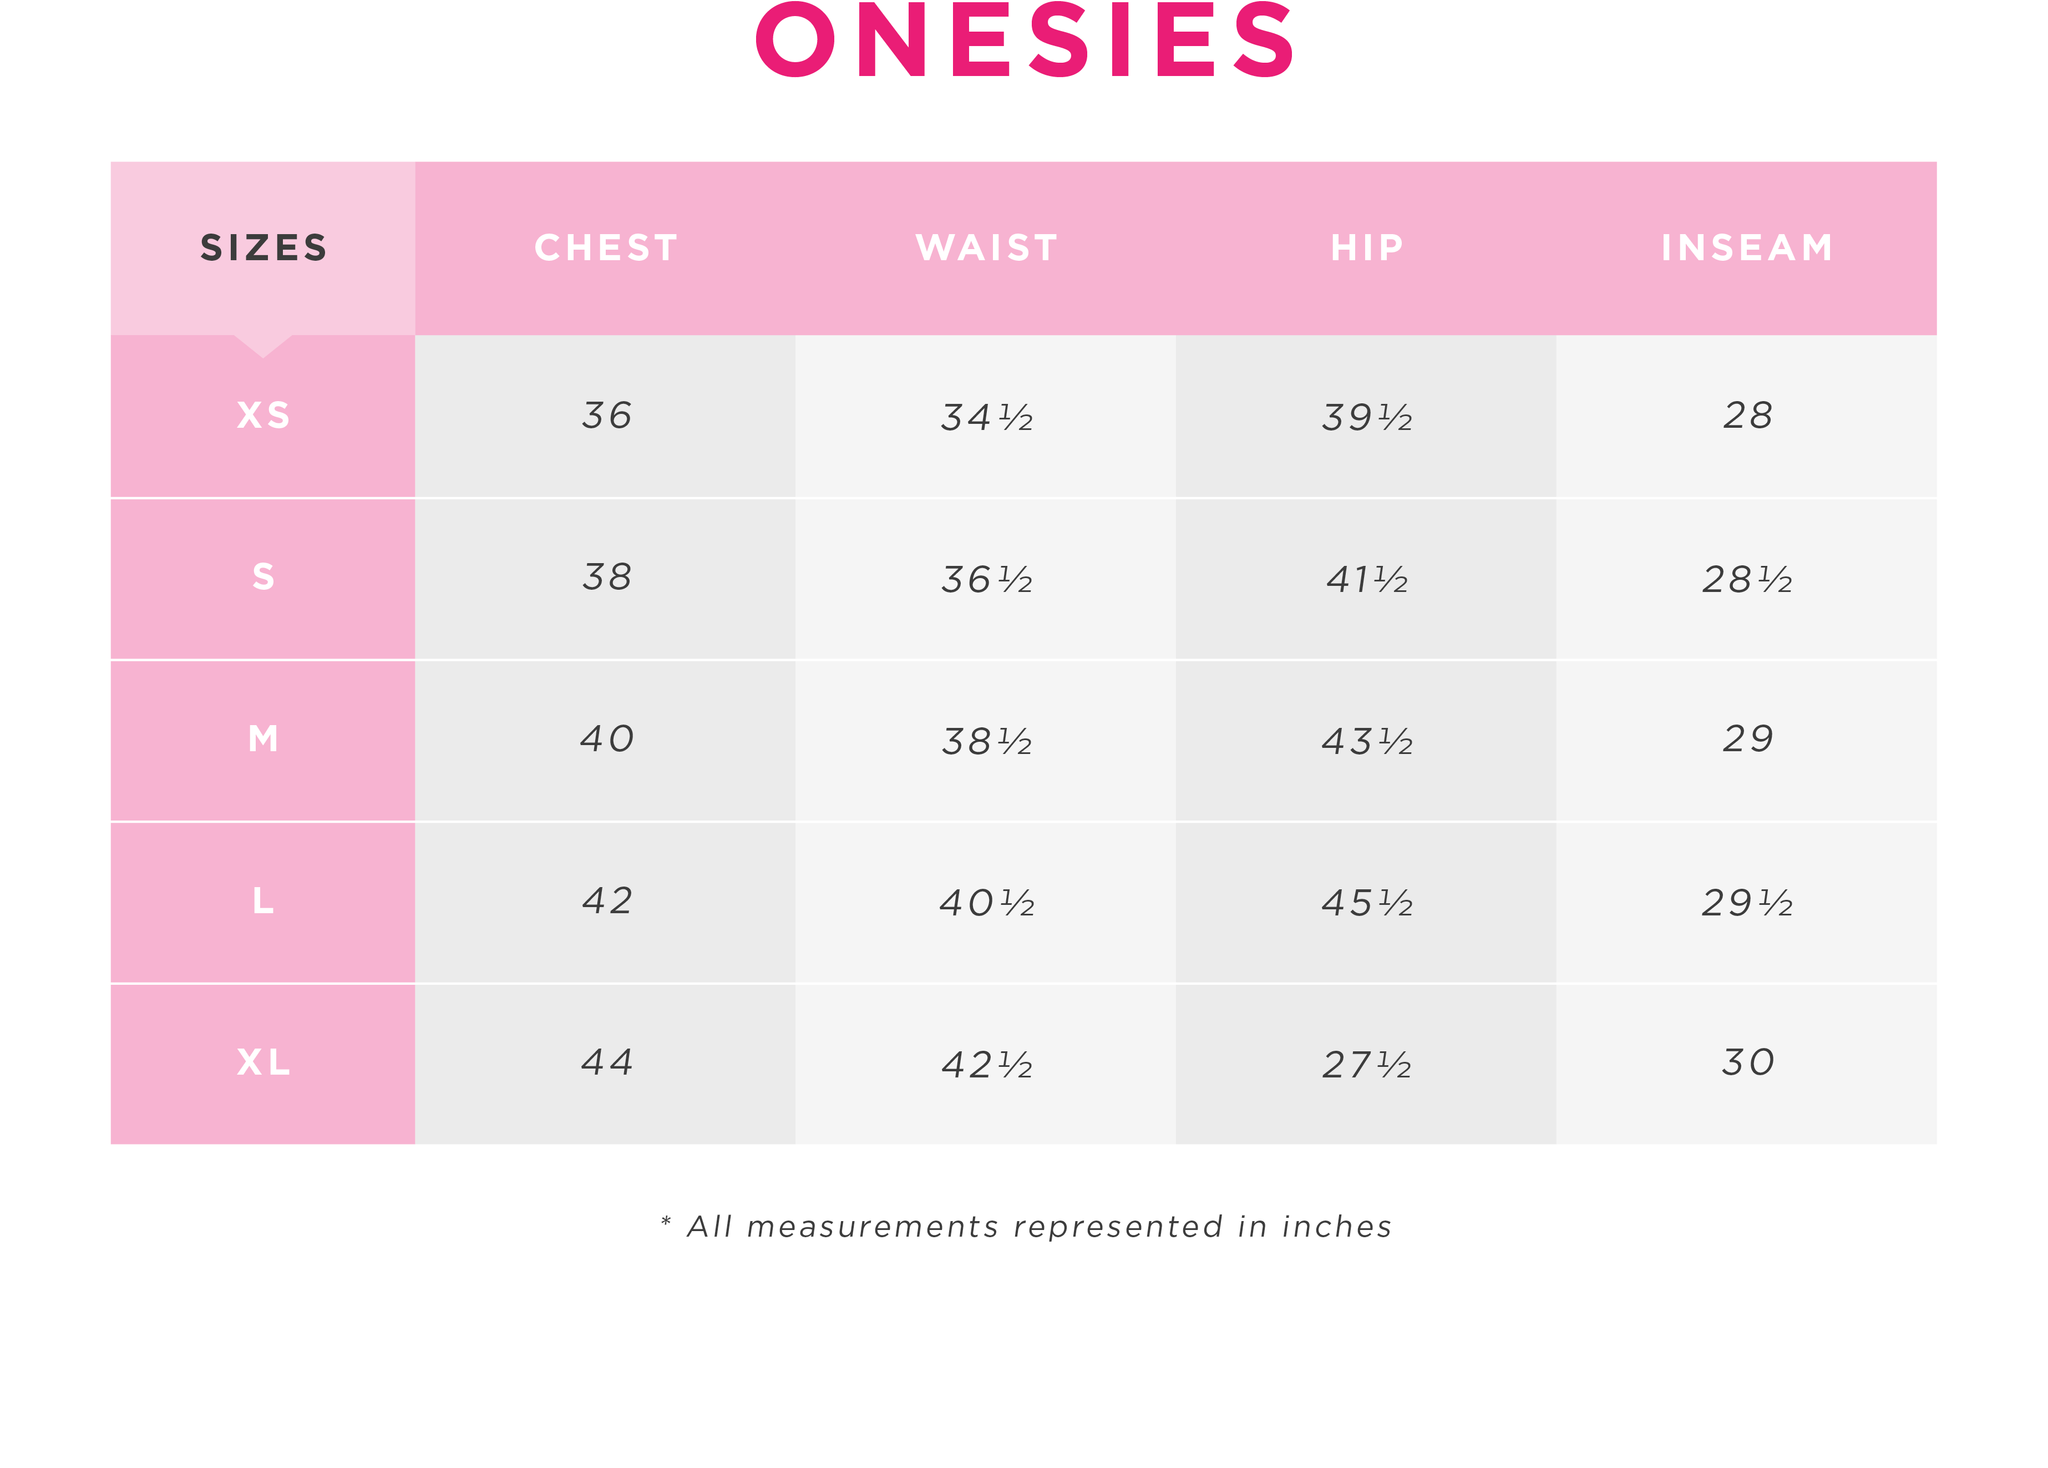 Charlotte Russe - Onesies Size Guide